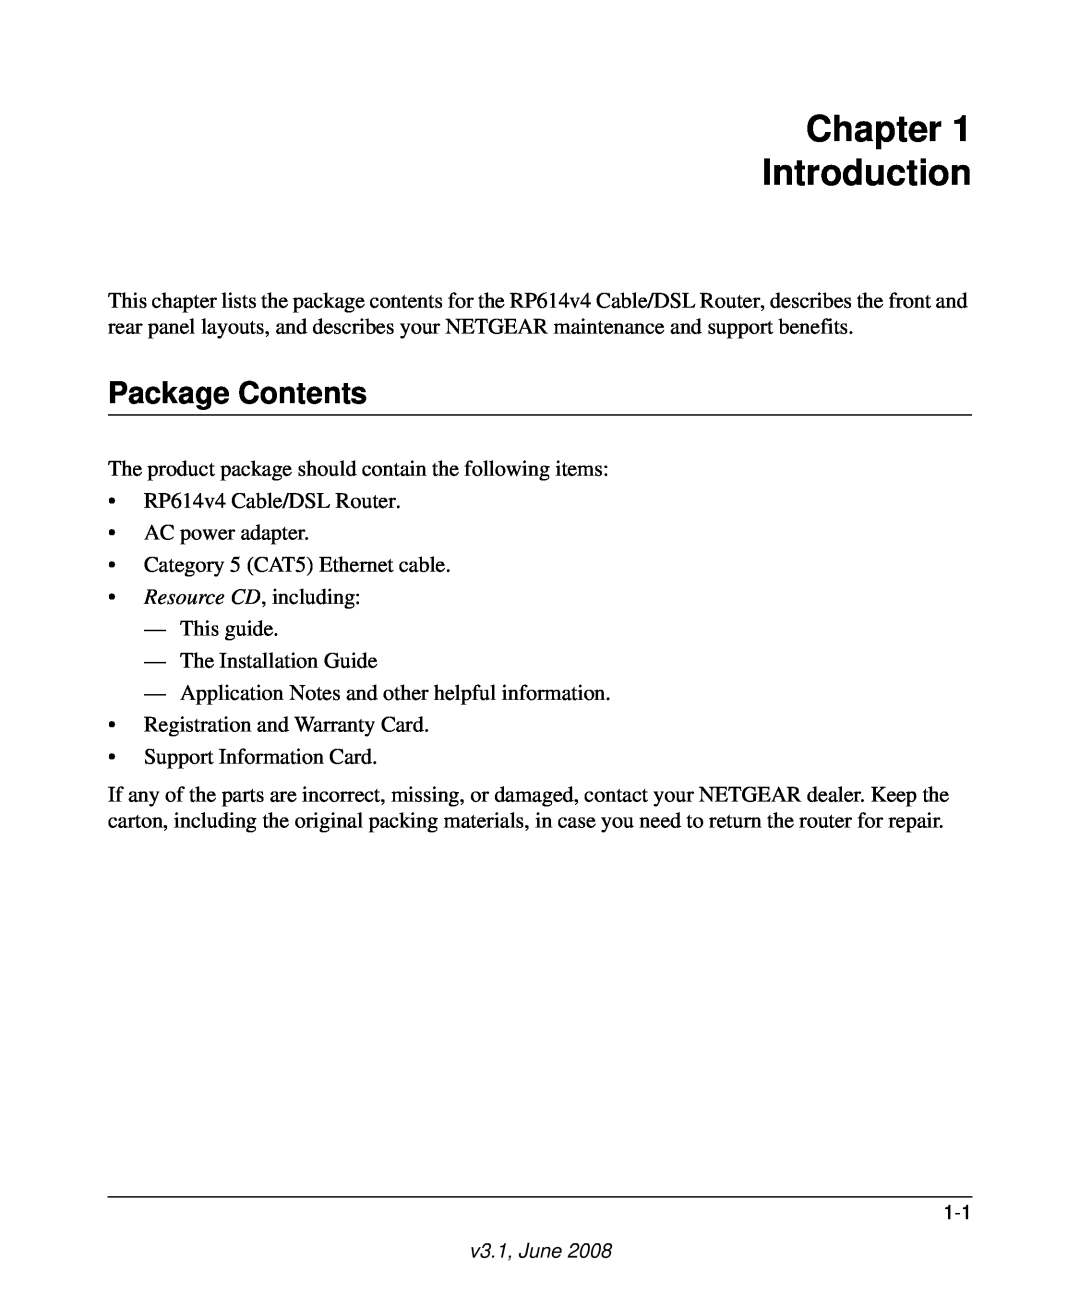 NETGEAR RP614 v4 manual Chapter Introduction, Package Contents 